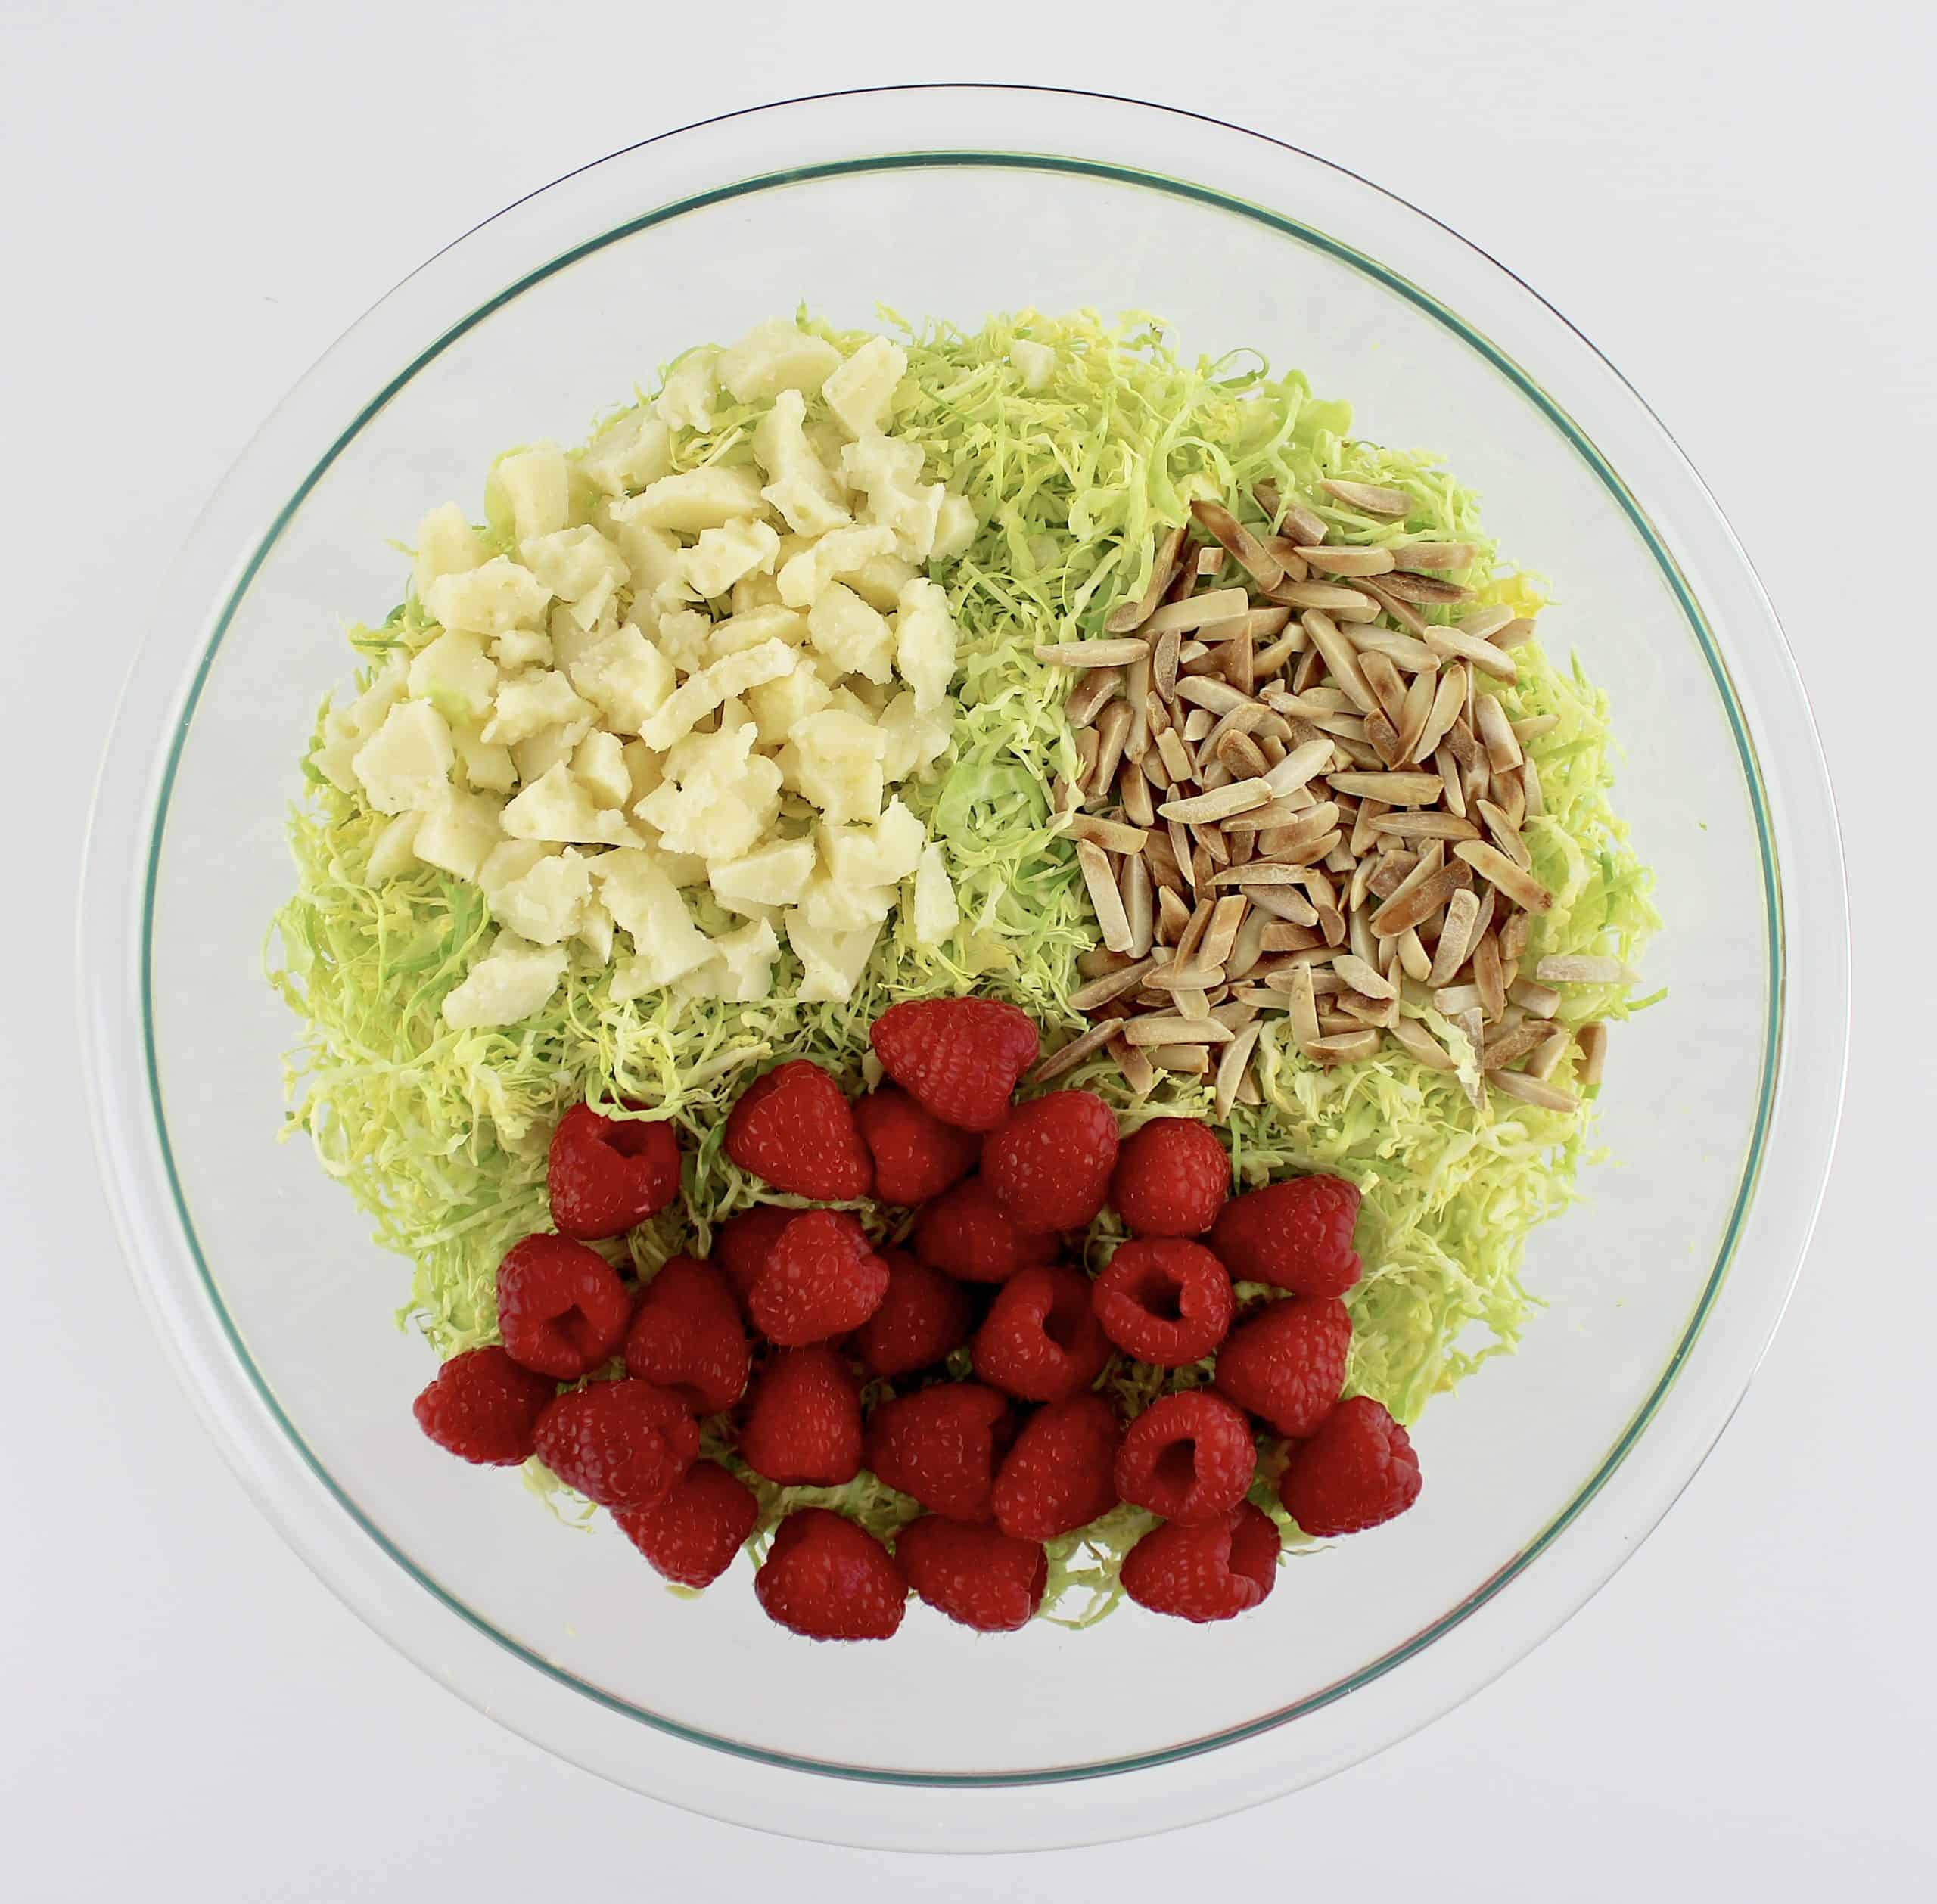 shaved brussels sprouts slivered toasted almonds raspberries and parmesan cheese shards in glass bowl